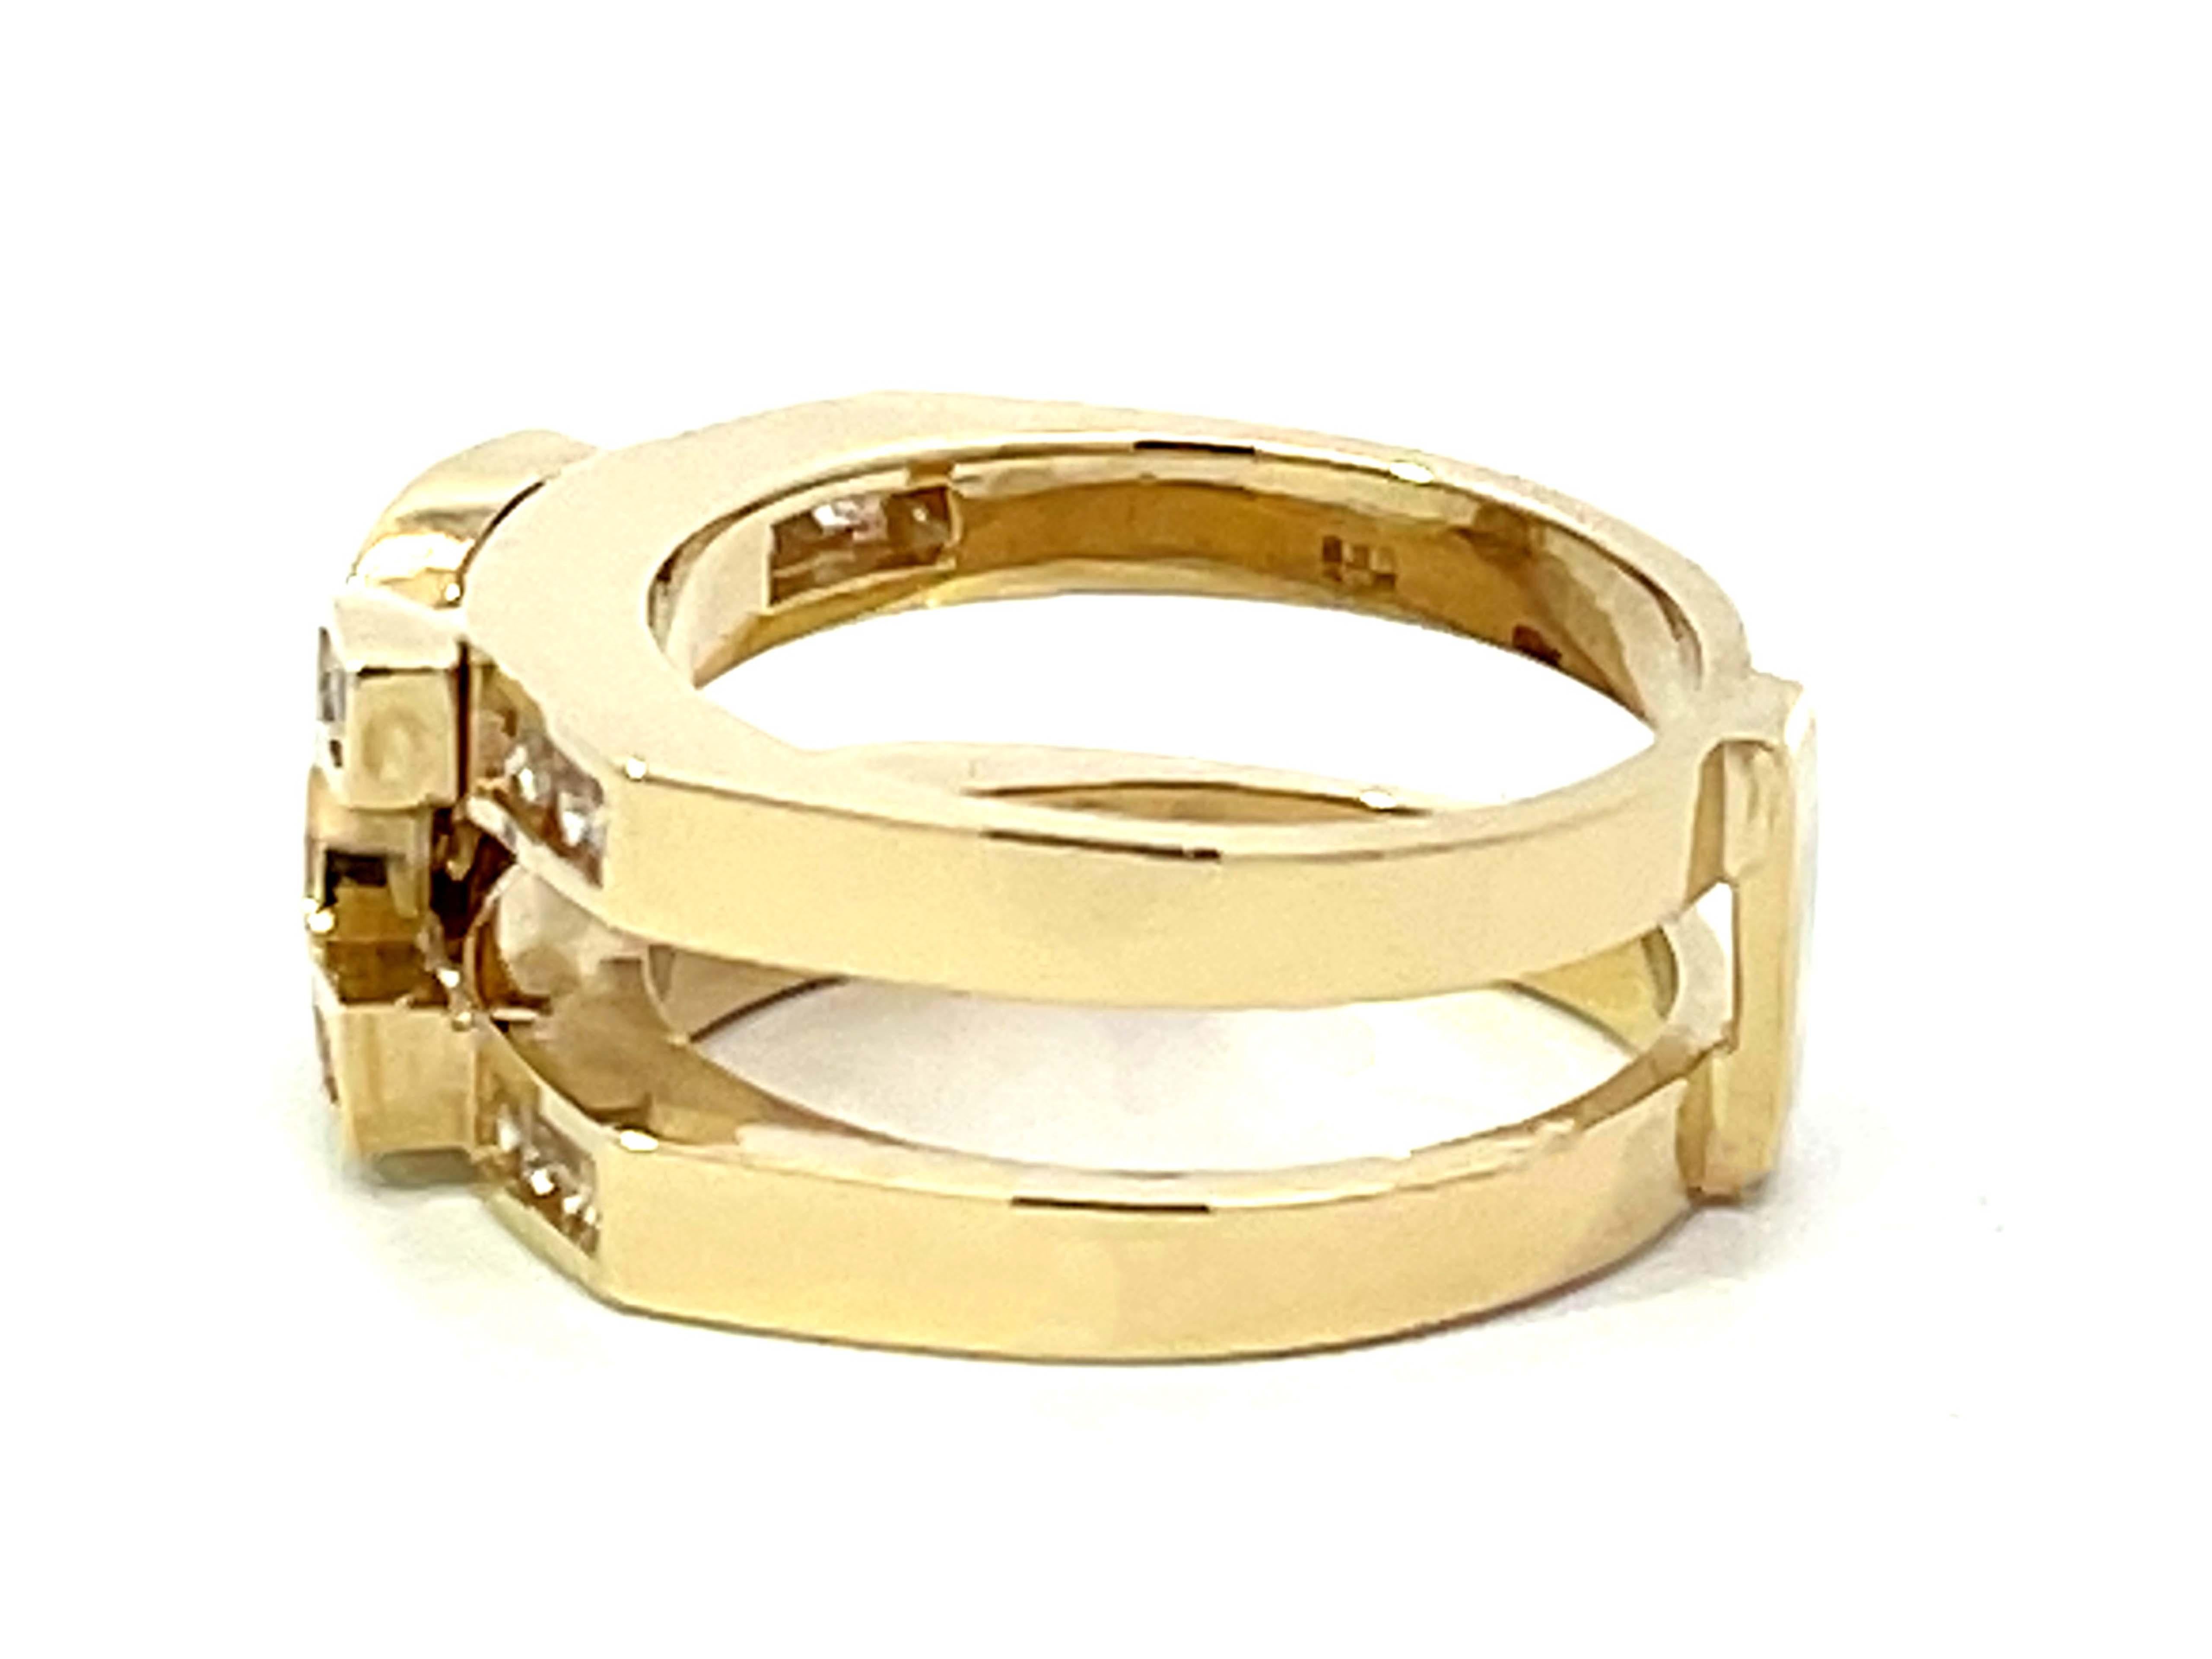 Double Horseshoe Diamond Band Ring in 14K Yellow Gold In Excellent Condition For Sale In Honolulu, HI